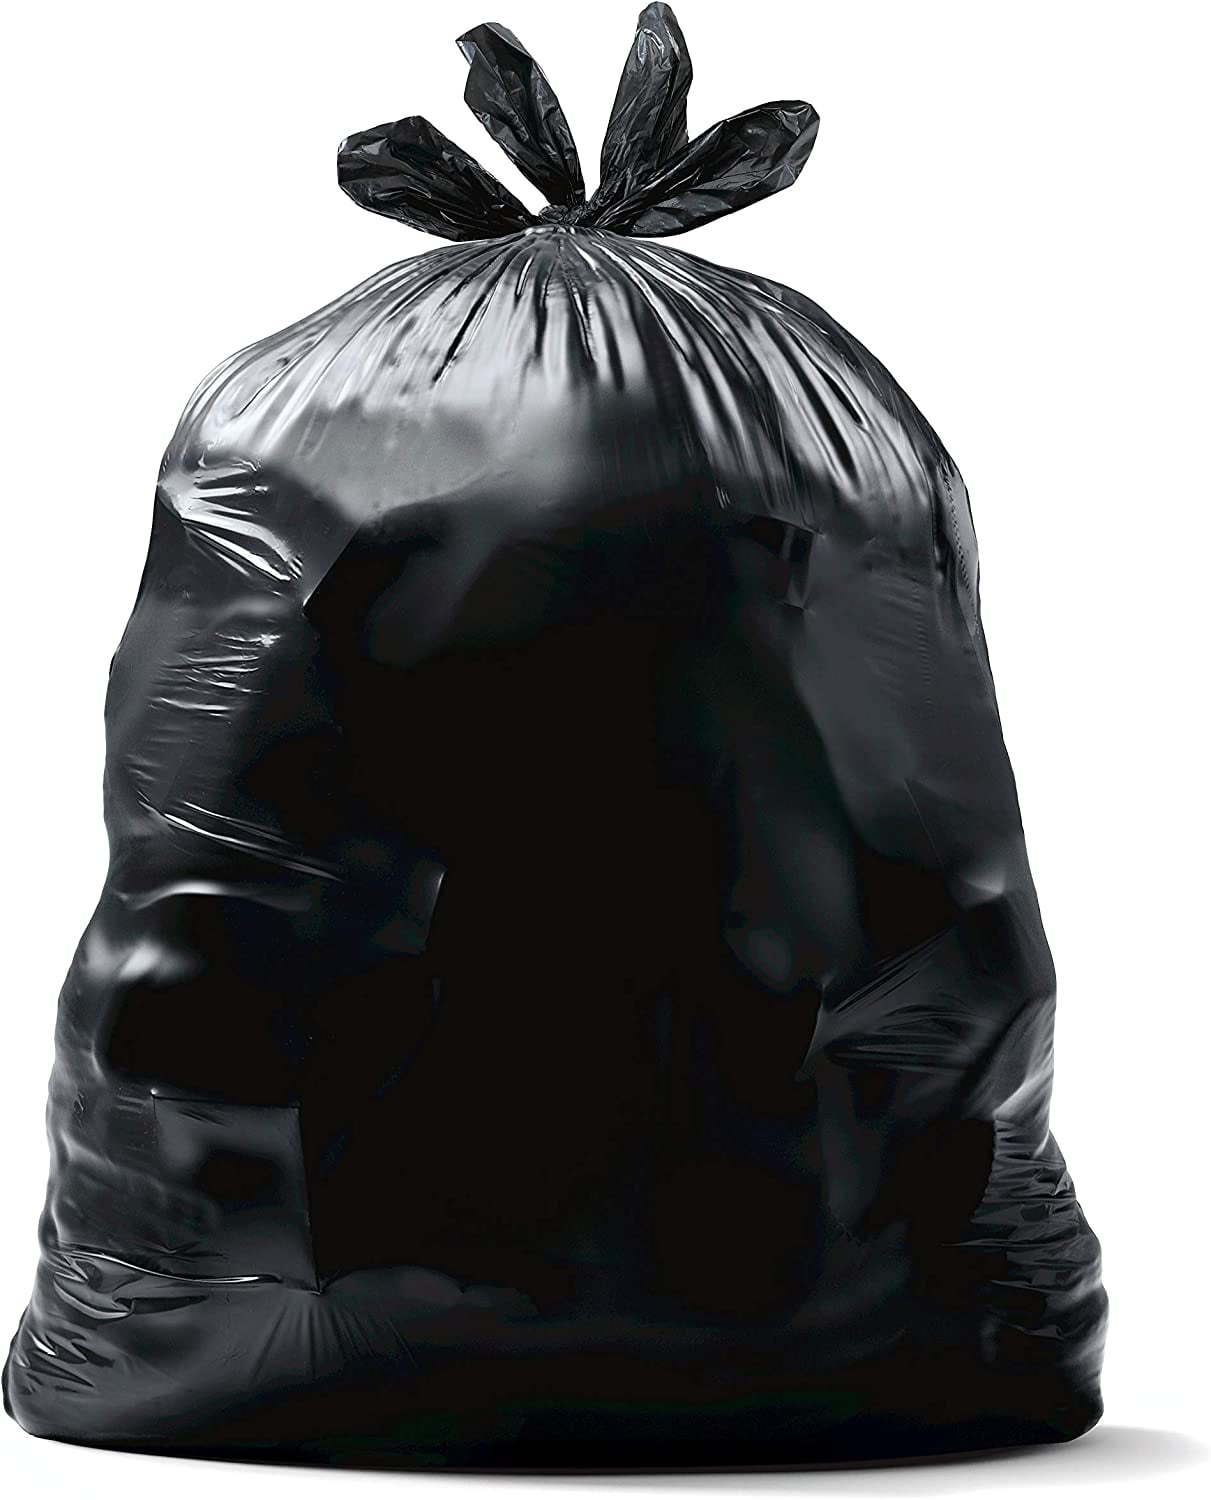 Glad® Guaranteed Strong Large Quick-Tie® Trash Bags, 30 Gallon, 10 Count, Shop